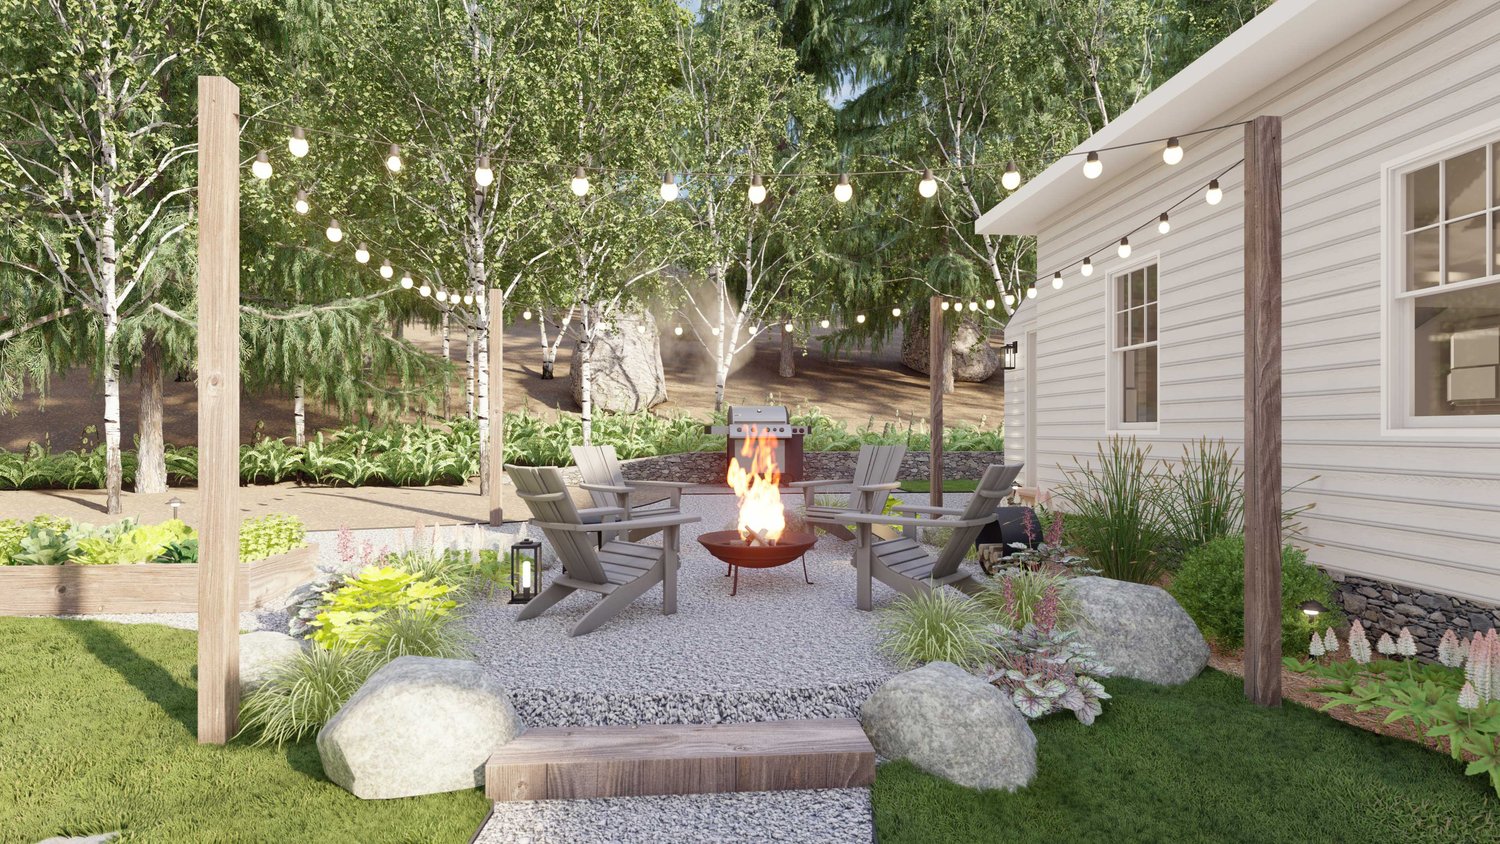 Long Island side yard with string lights over concrete patio fire pit seating area, outdoor kitchen, flower beds and trees